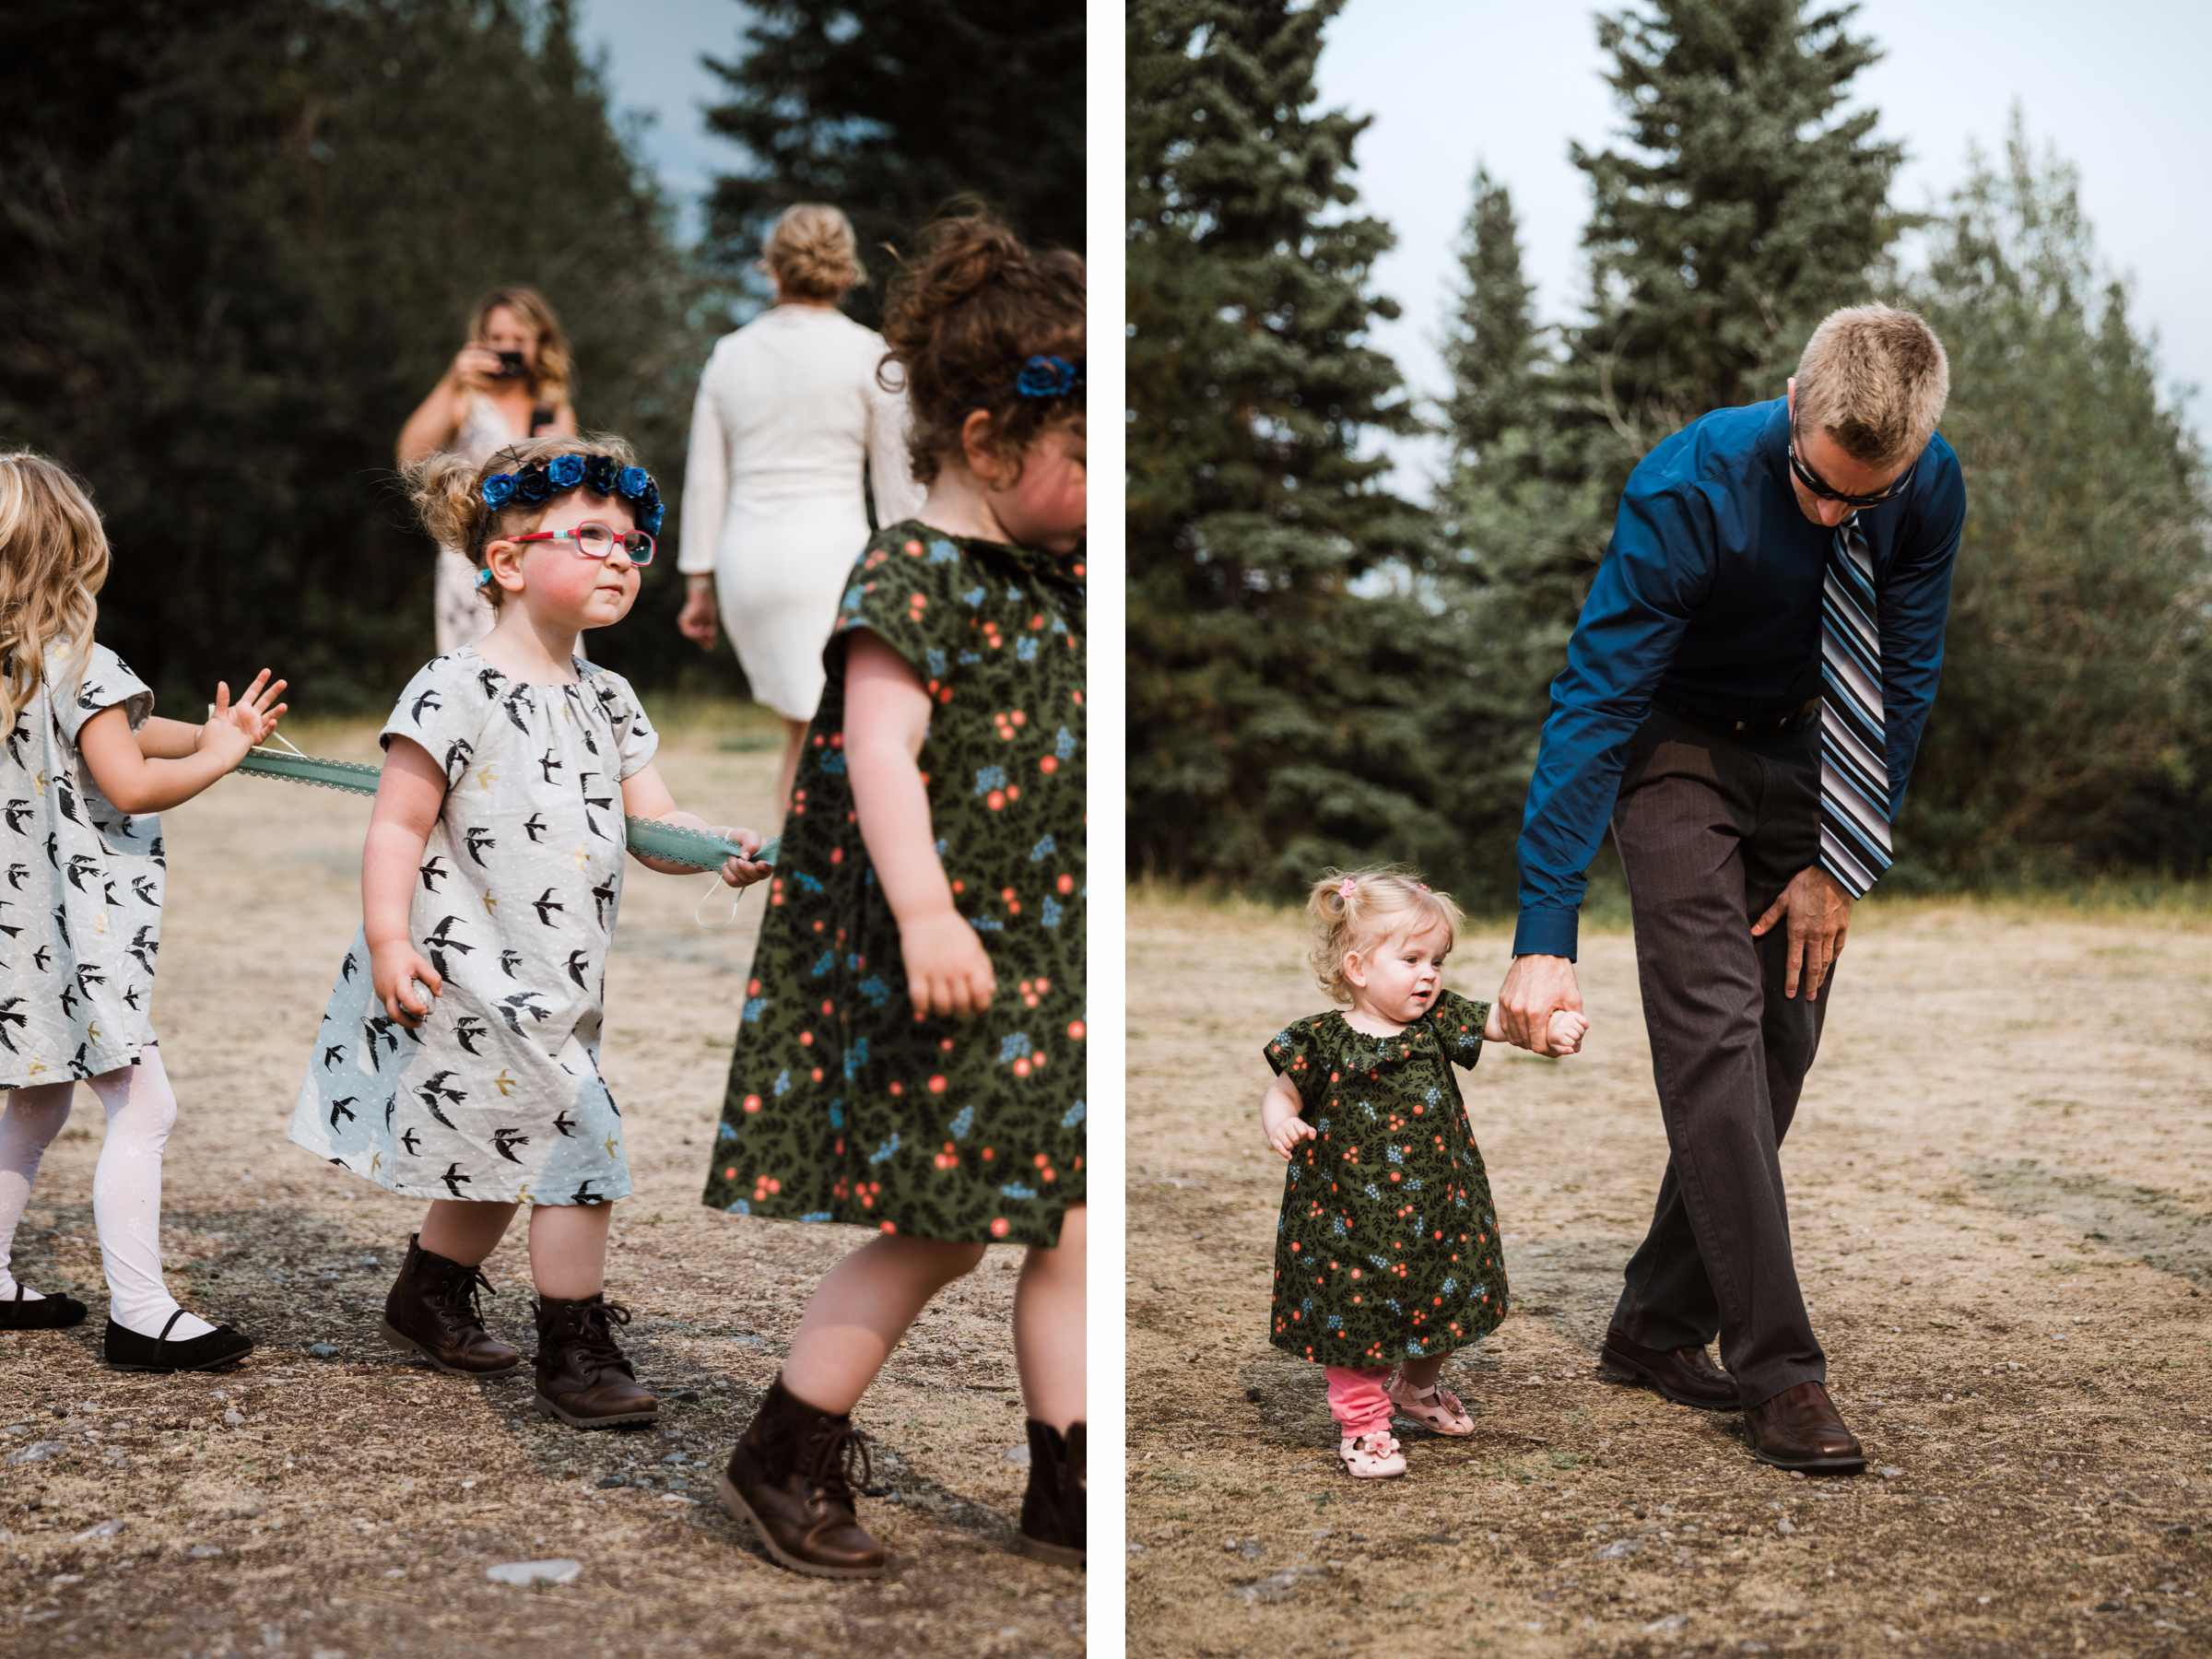 Calgary wedding photographer at Canmore and Banff destination elopement wedding in rocky mountains, Alberta, Canada - Photo 4